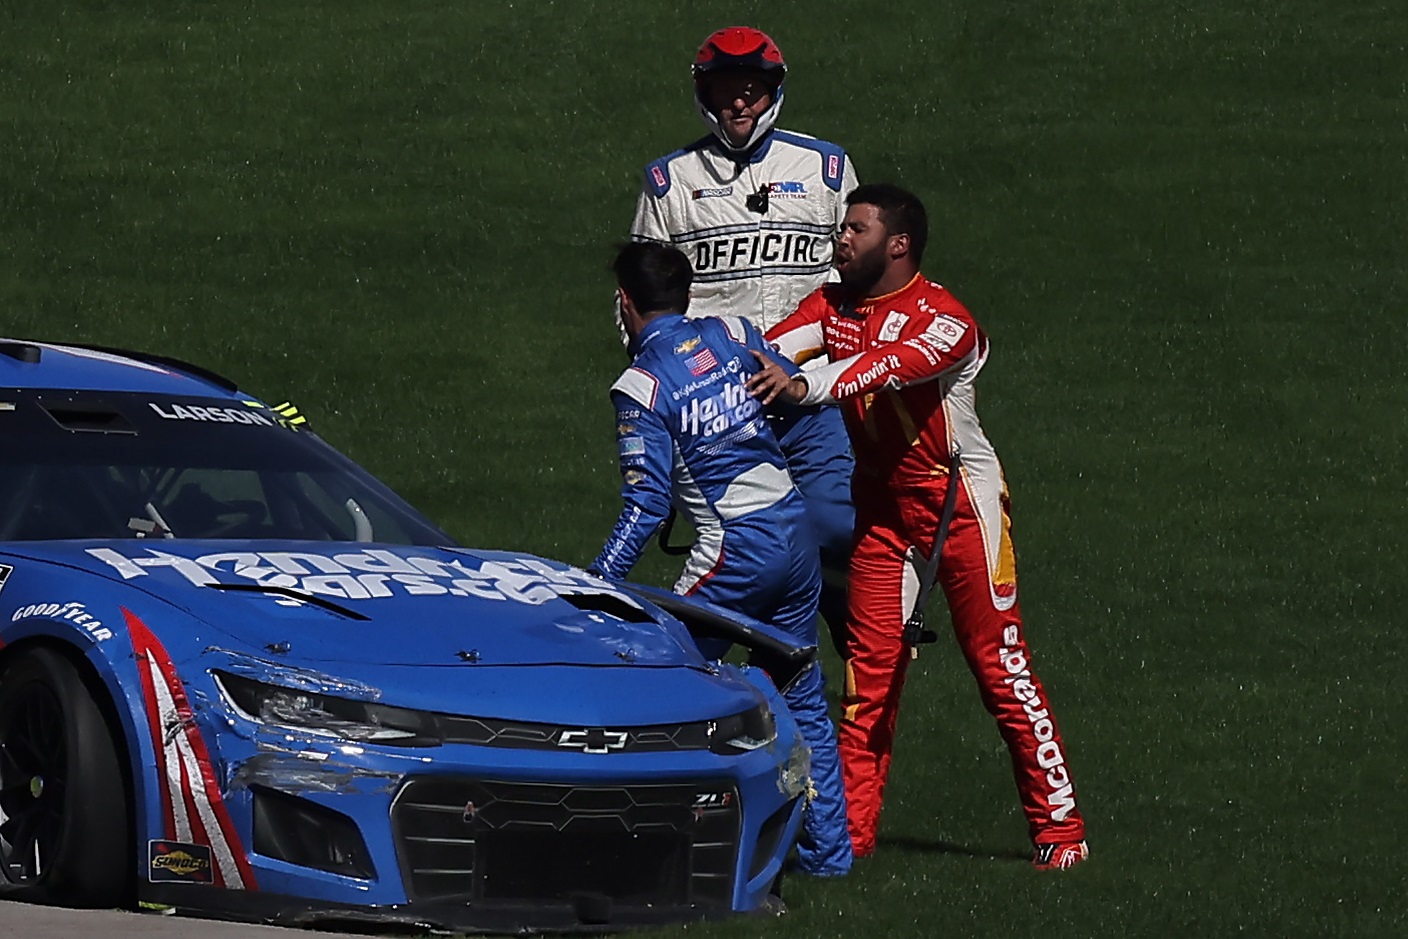 Bubba Wallace confronts Kyle Larson after a wreck during the NASCAR Cup Series South Point 400 at Las Vegas Motor Speedway on Oct. 16, 2022.